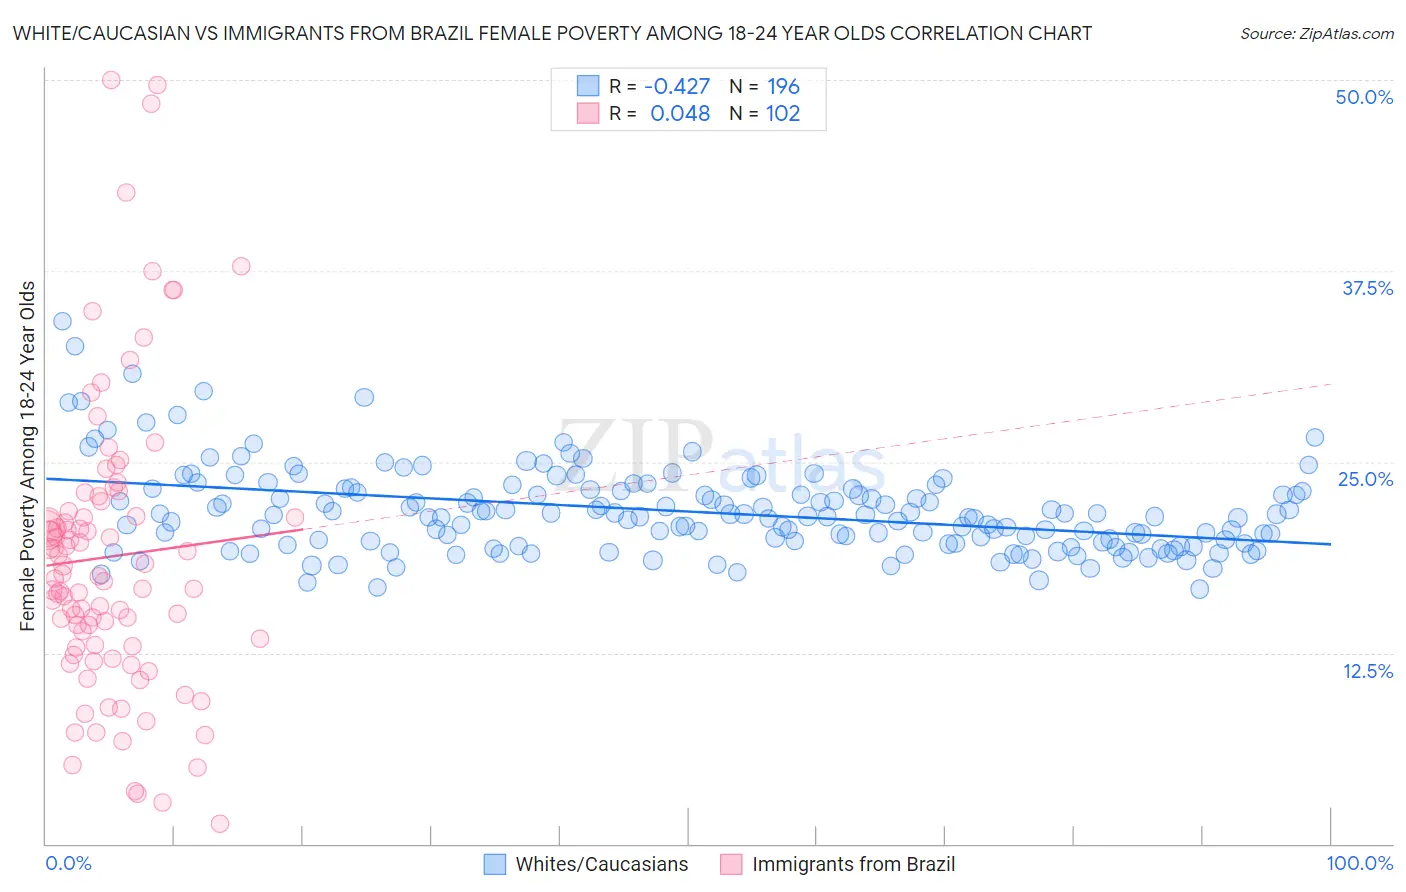 White/Caucasian vs Immigrants from Brazil Female Poverty Among 18-24 Year Olds